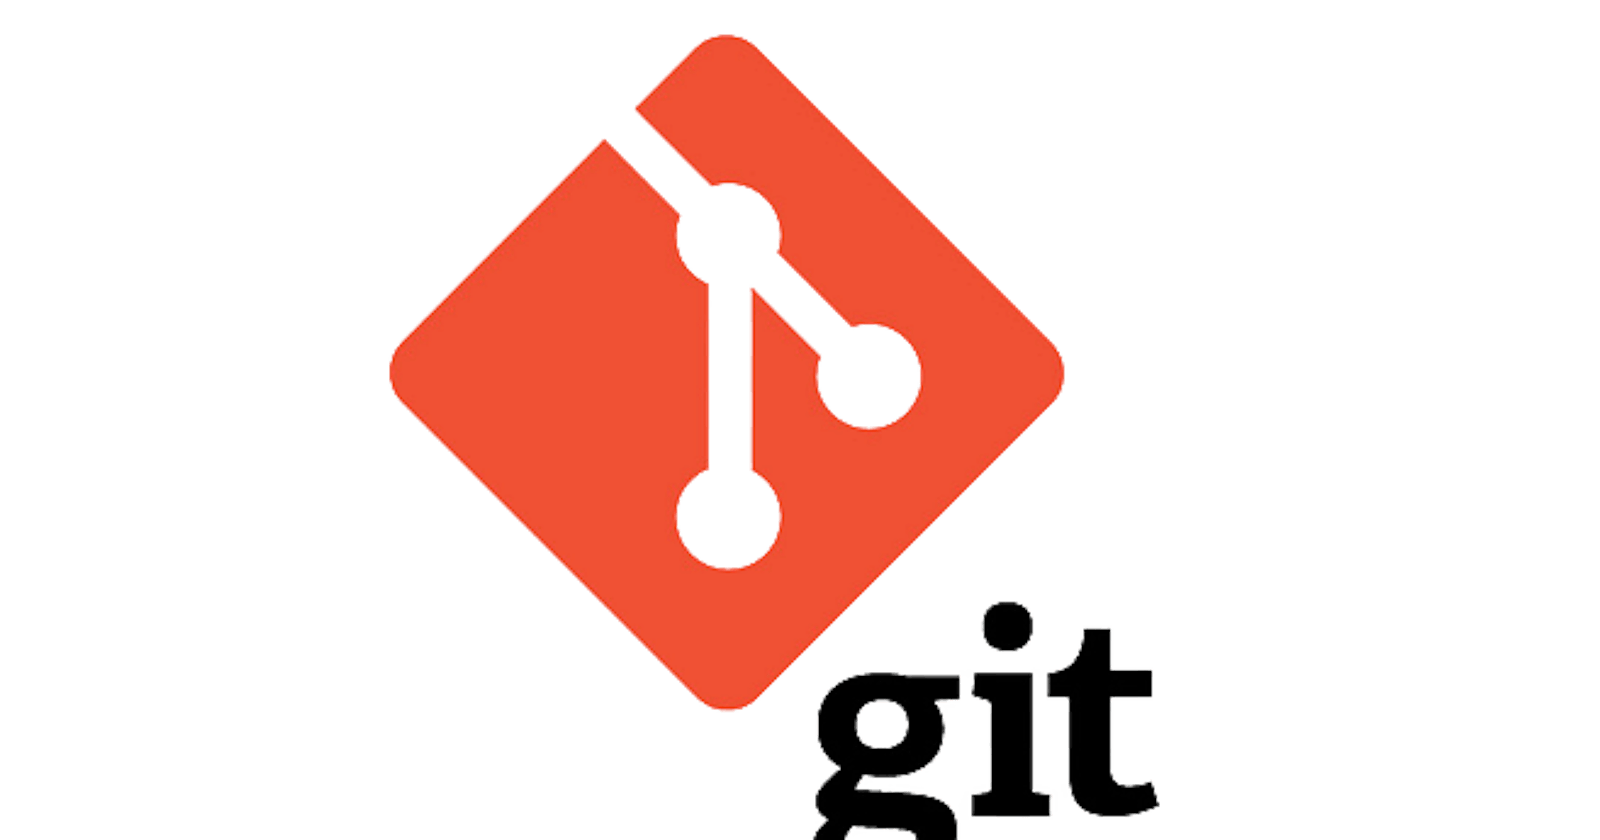 Git fundamentals for Data Science and Machine Learning